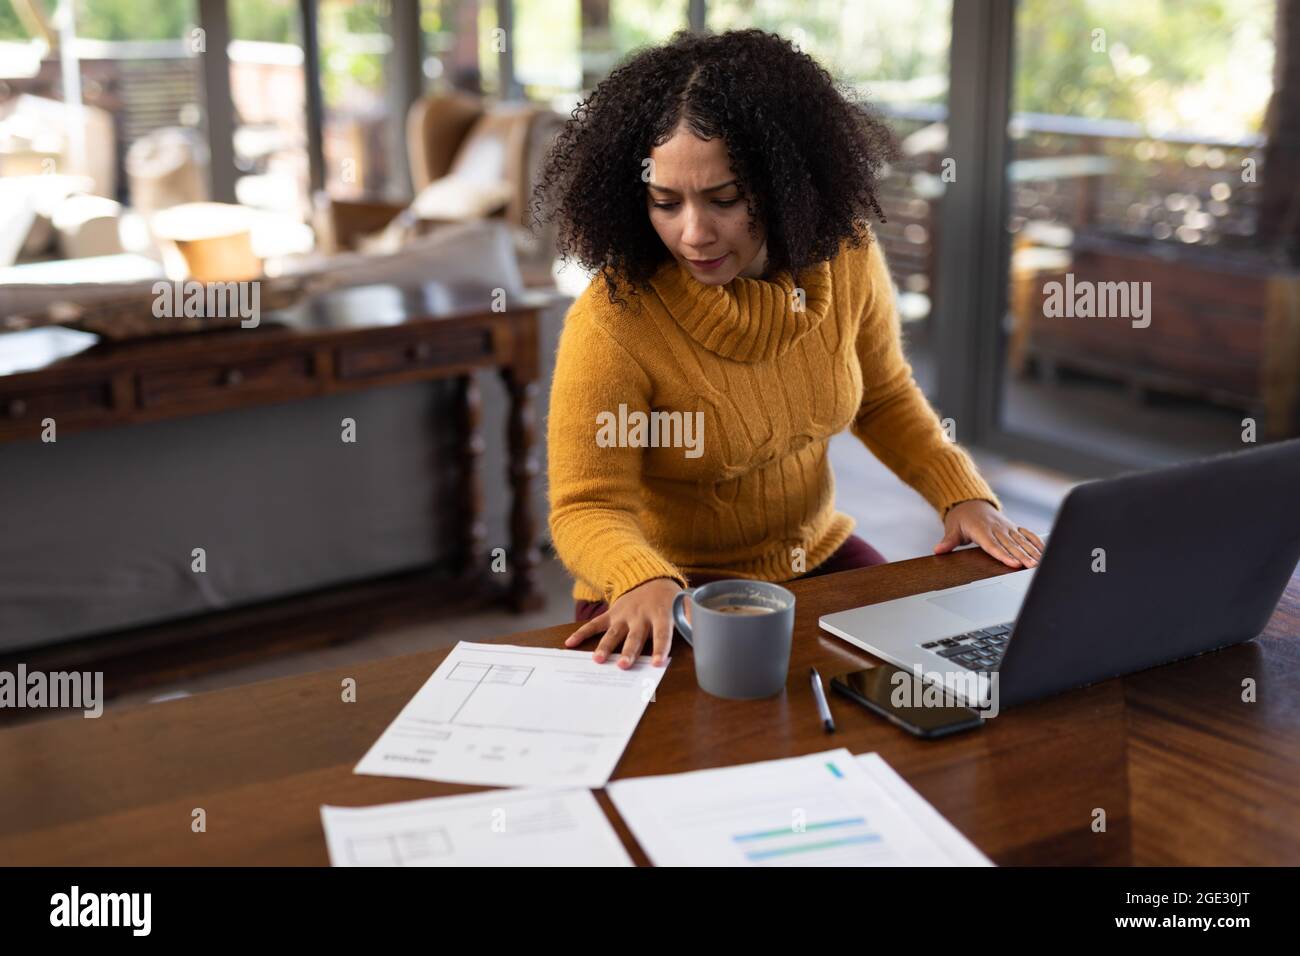 Mixed race woman sitting at table and working remotely using laptop Stock Photo